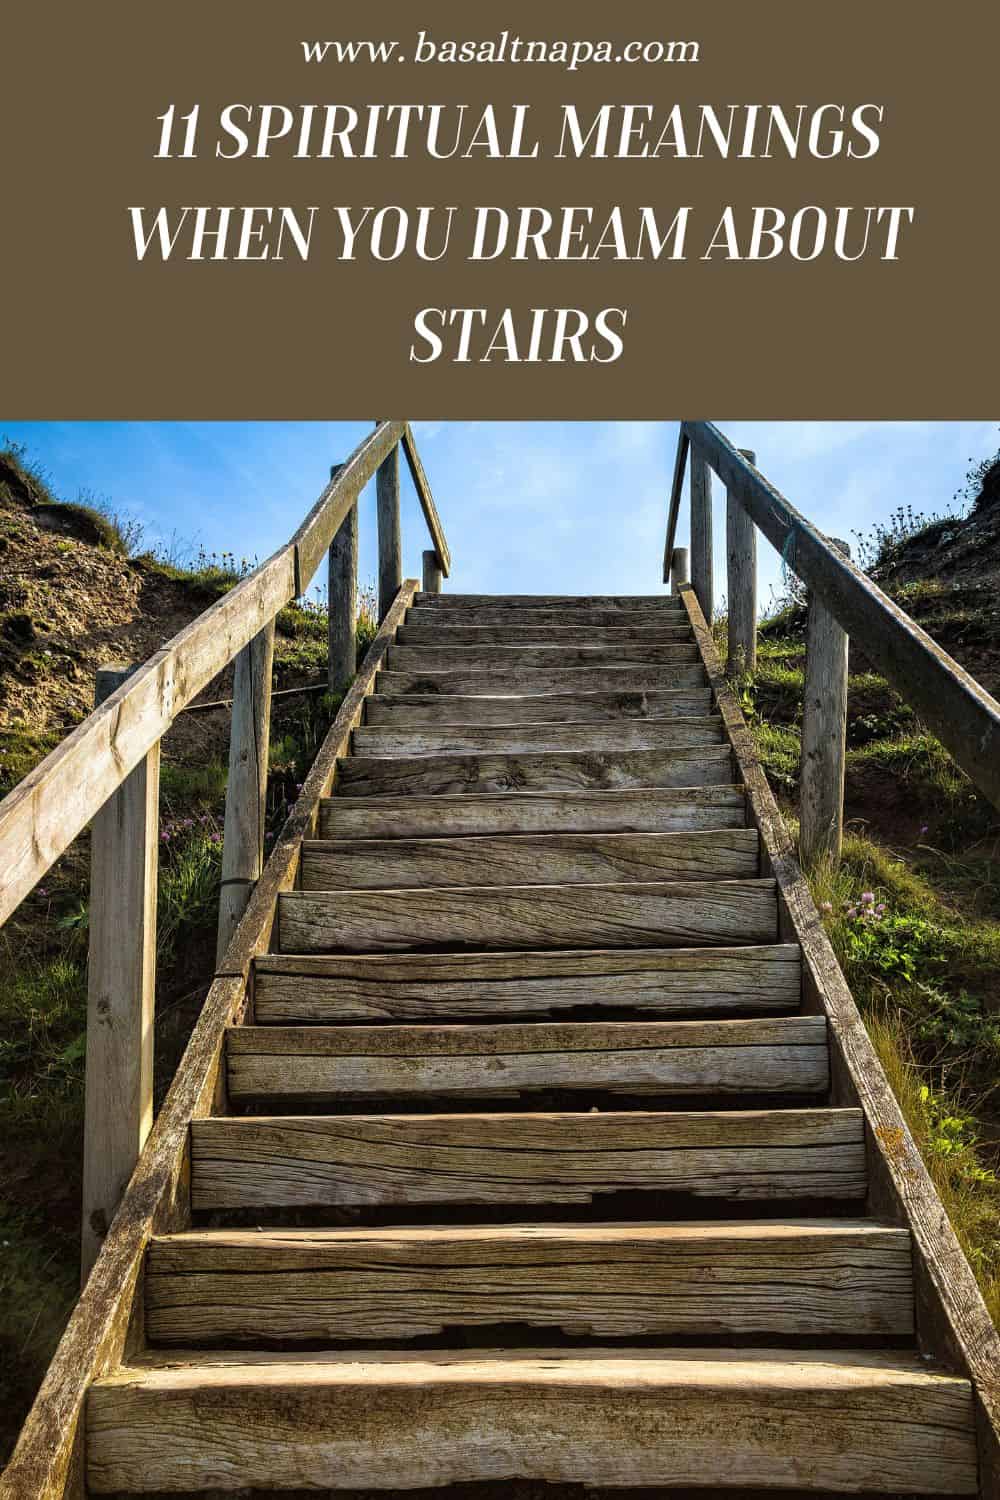 What Does It Mean To Dream About Stairs